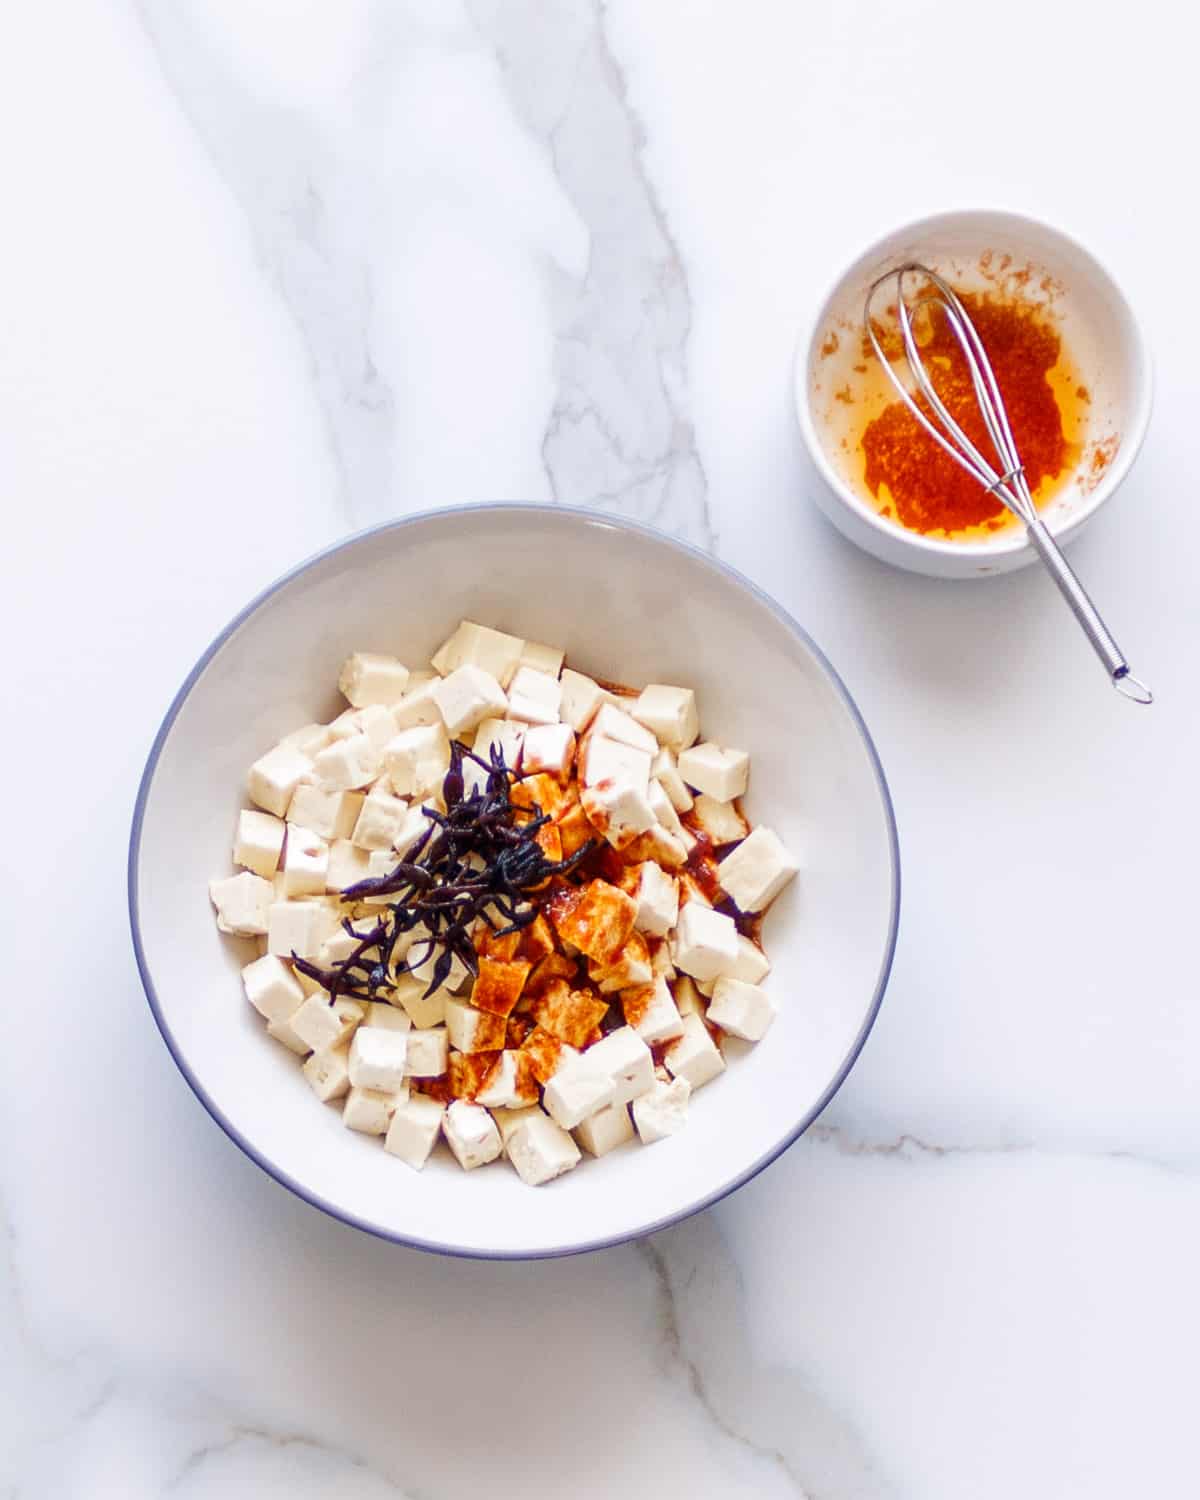 Tofu cubes with spicy sauce and seaweed.